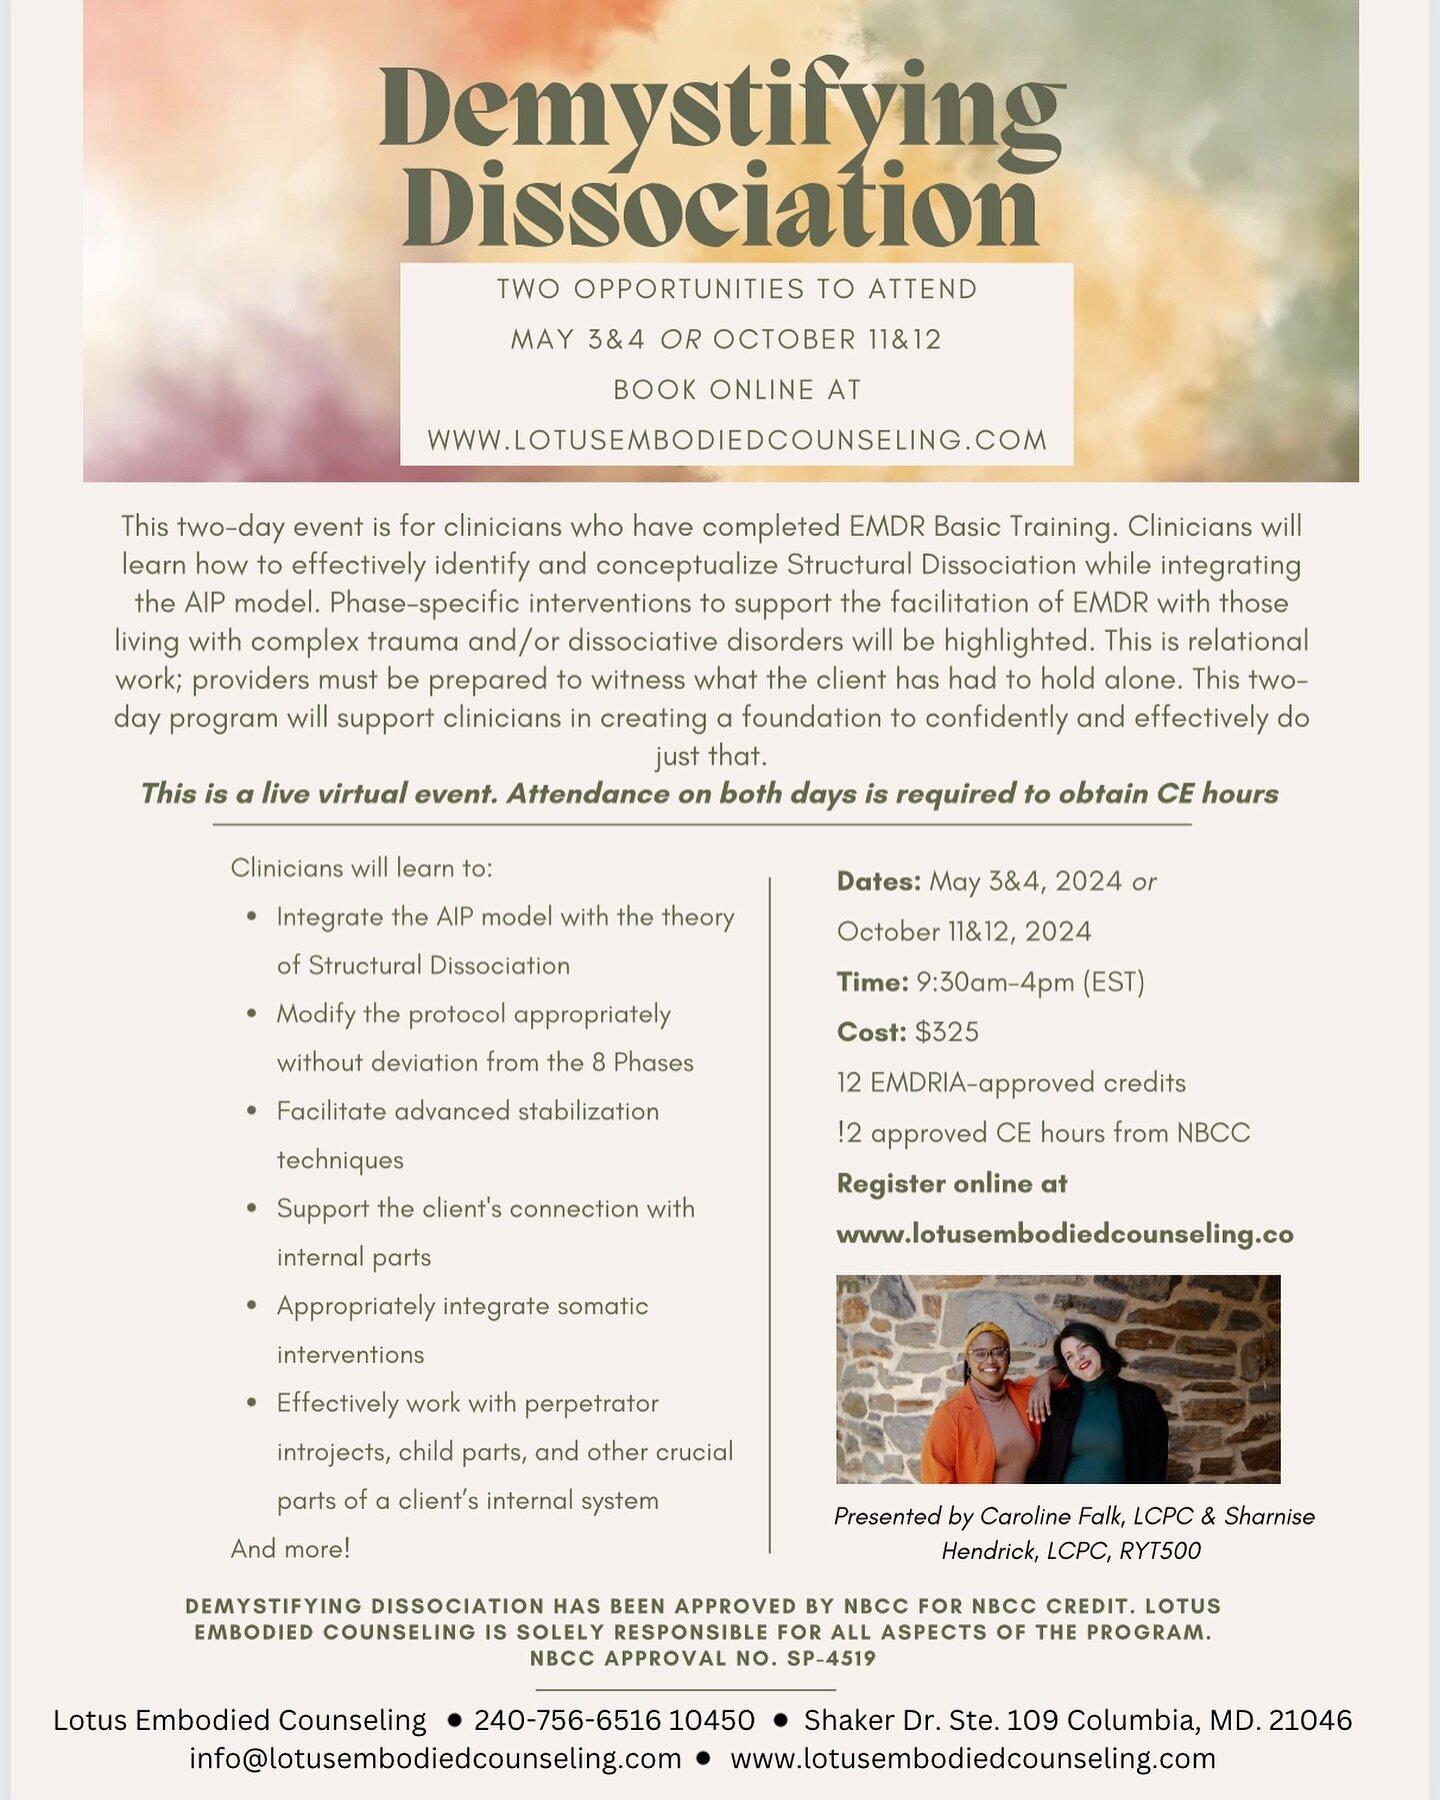 Demystifying Dissociation- EARLY25 for $25 off until April 16th. 

Approved for 12 NBCC ce hours and 12 EMDRIA credits

Learn to effectively integrate the theory of structural dissociation with the facilitation of EMDR to appropriately conceptualize 